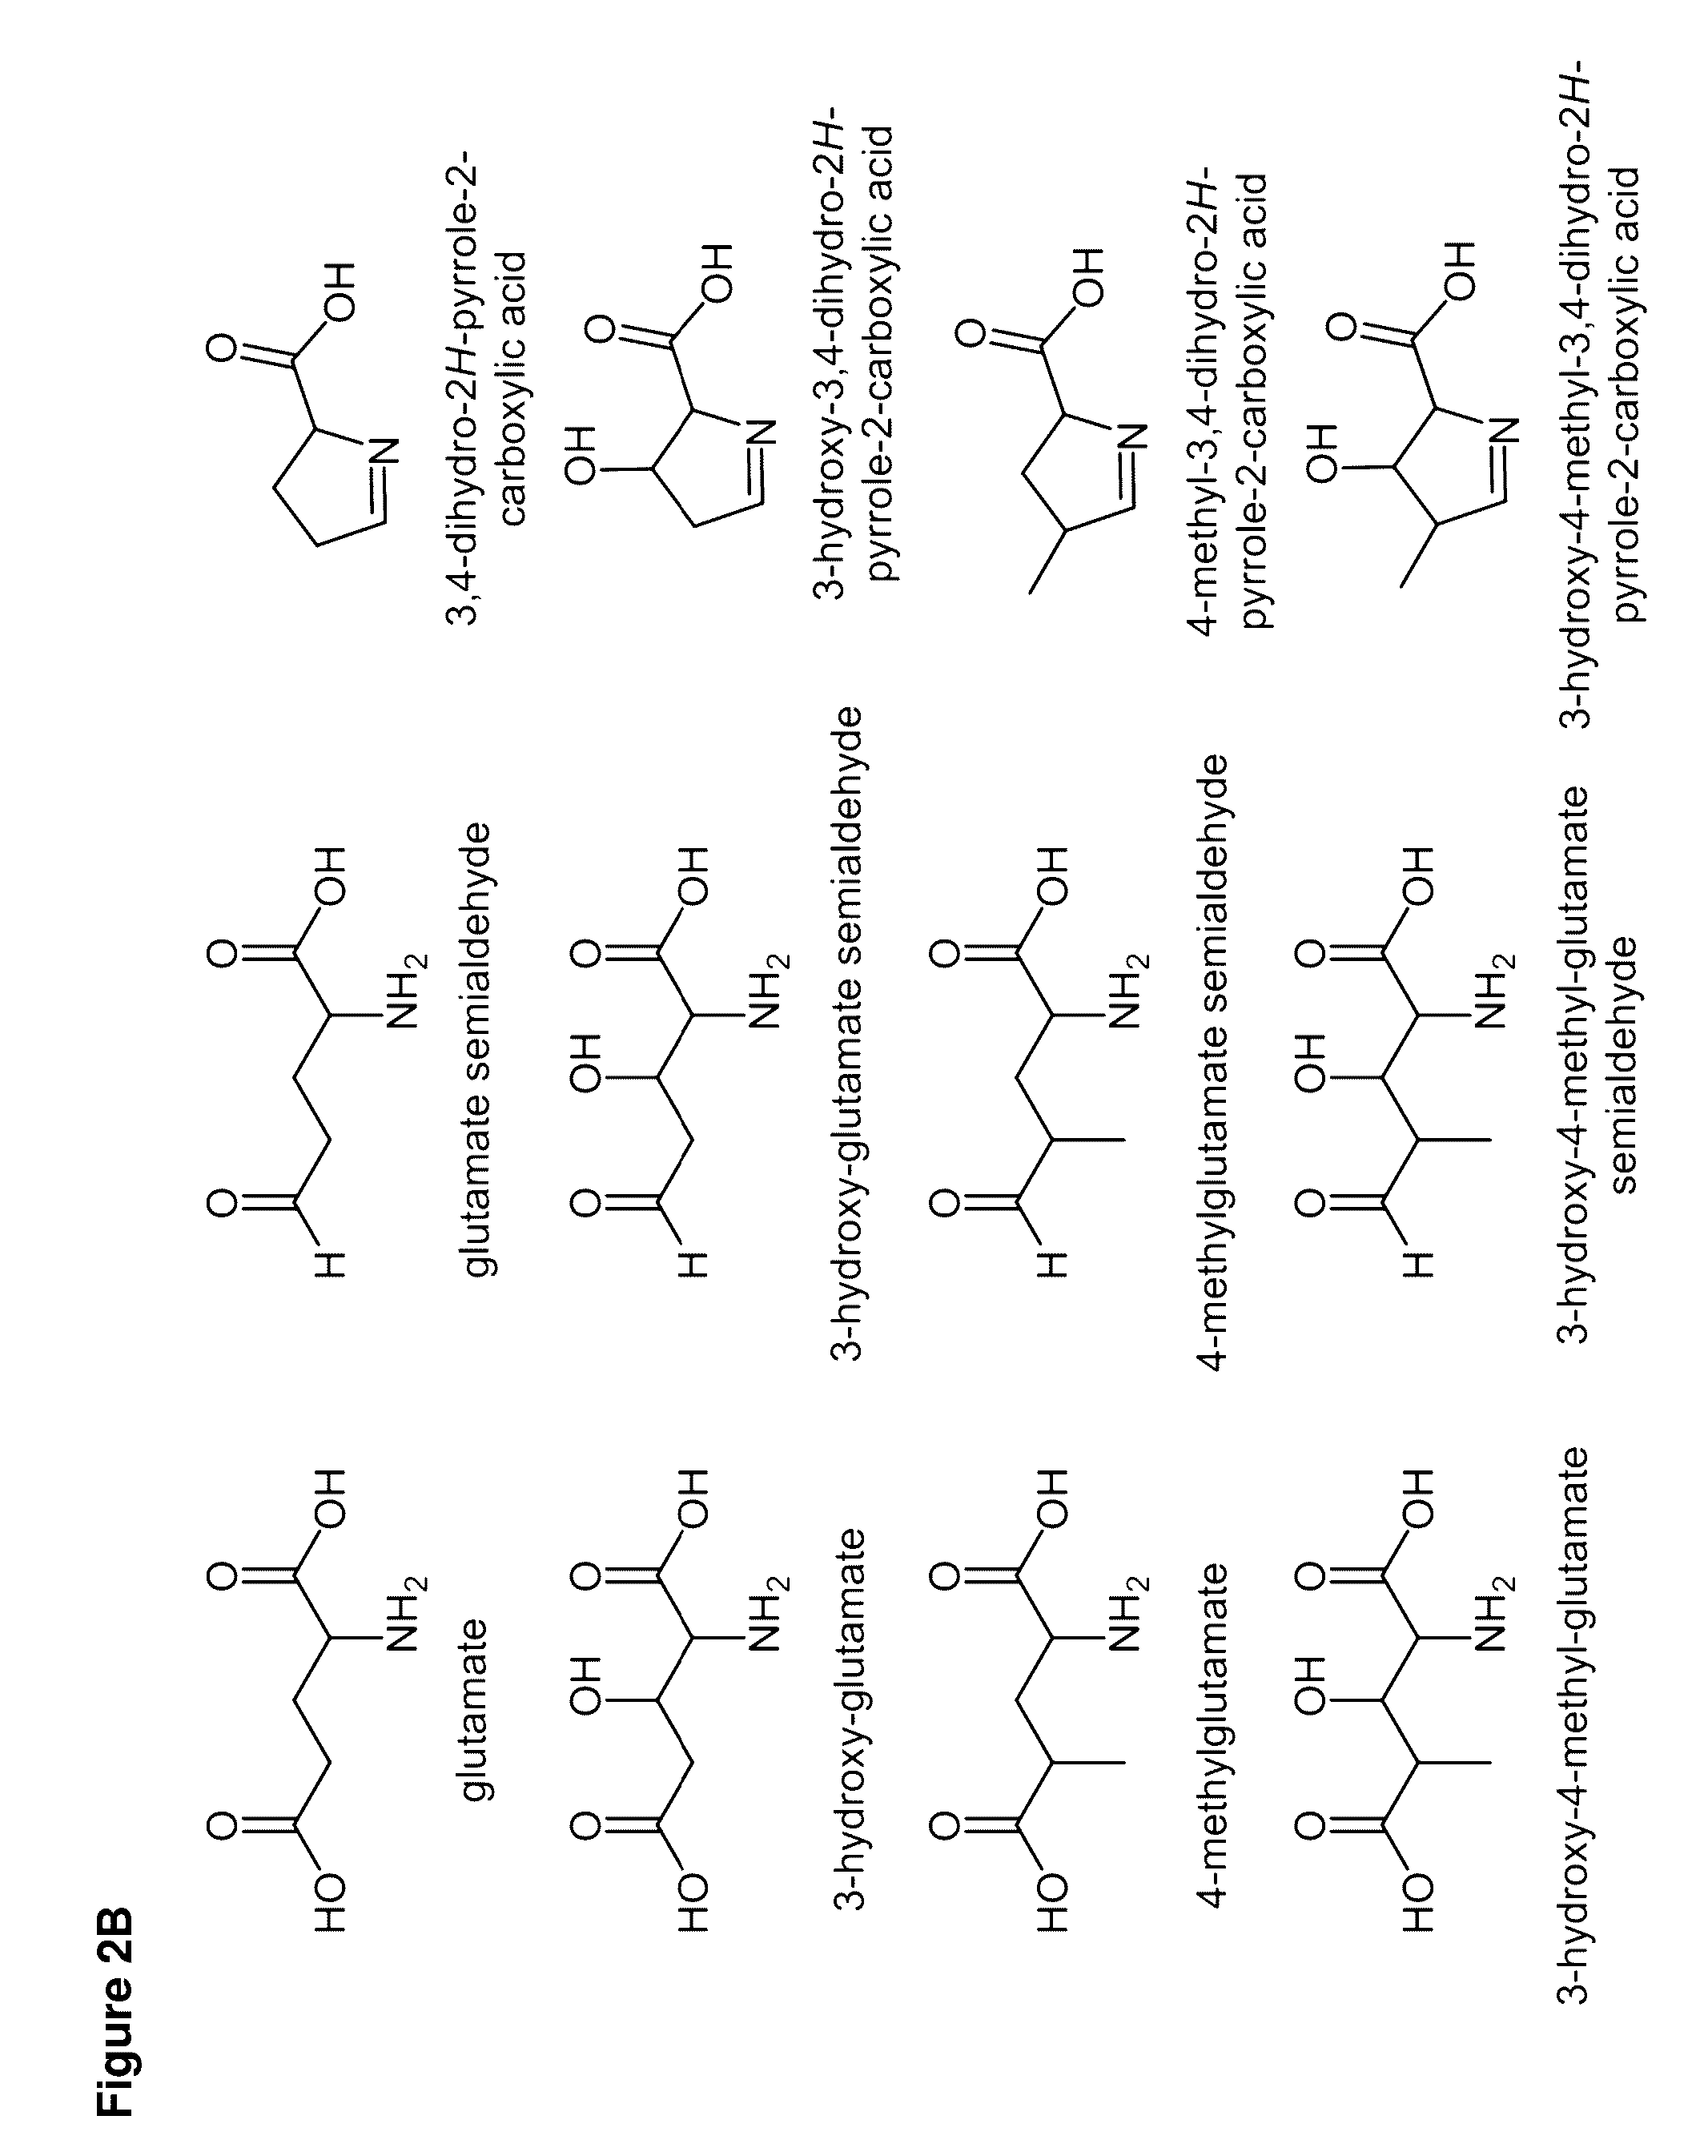 Cell-free preparation of carbapenems